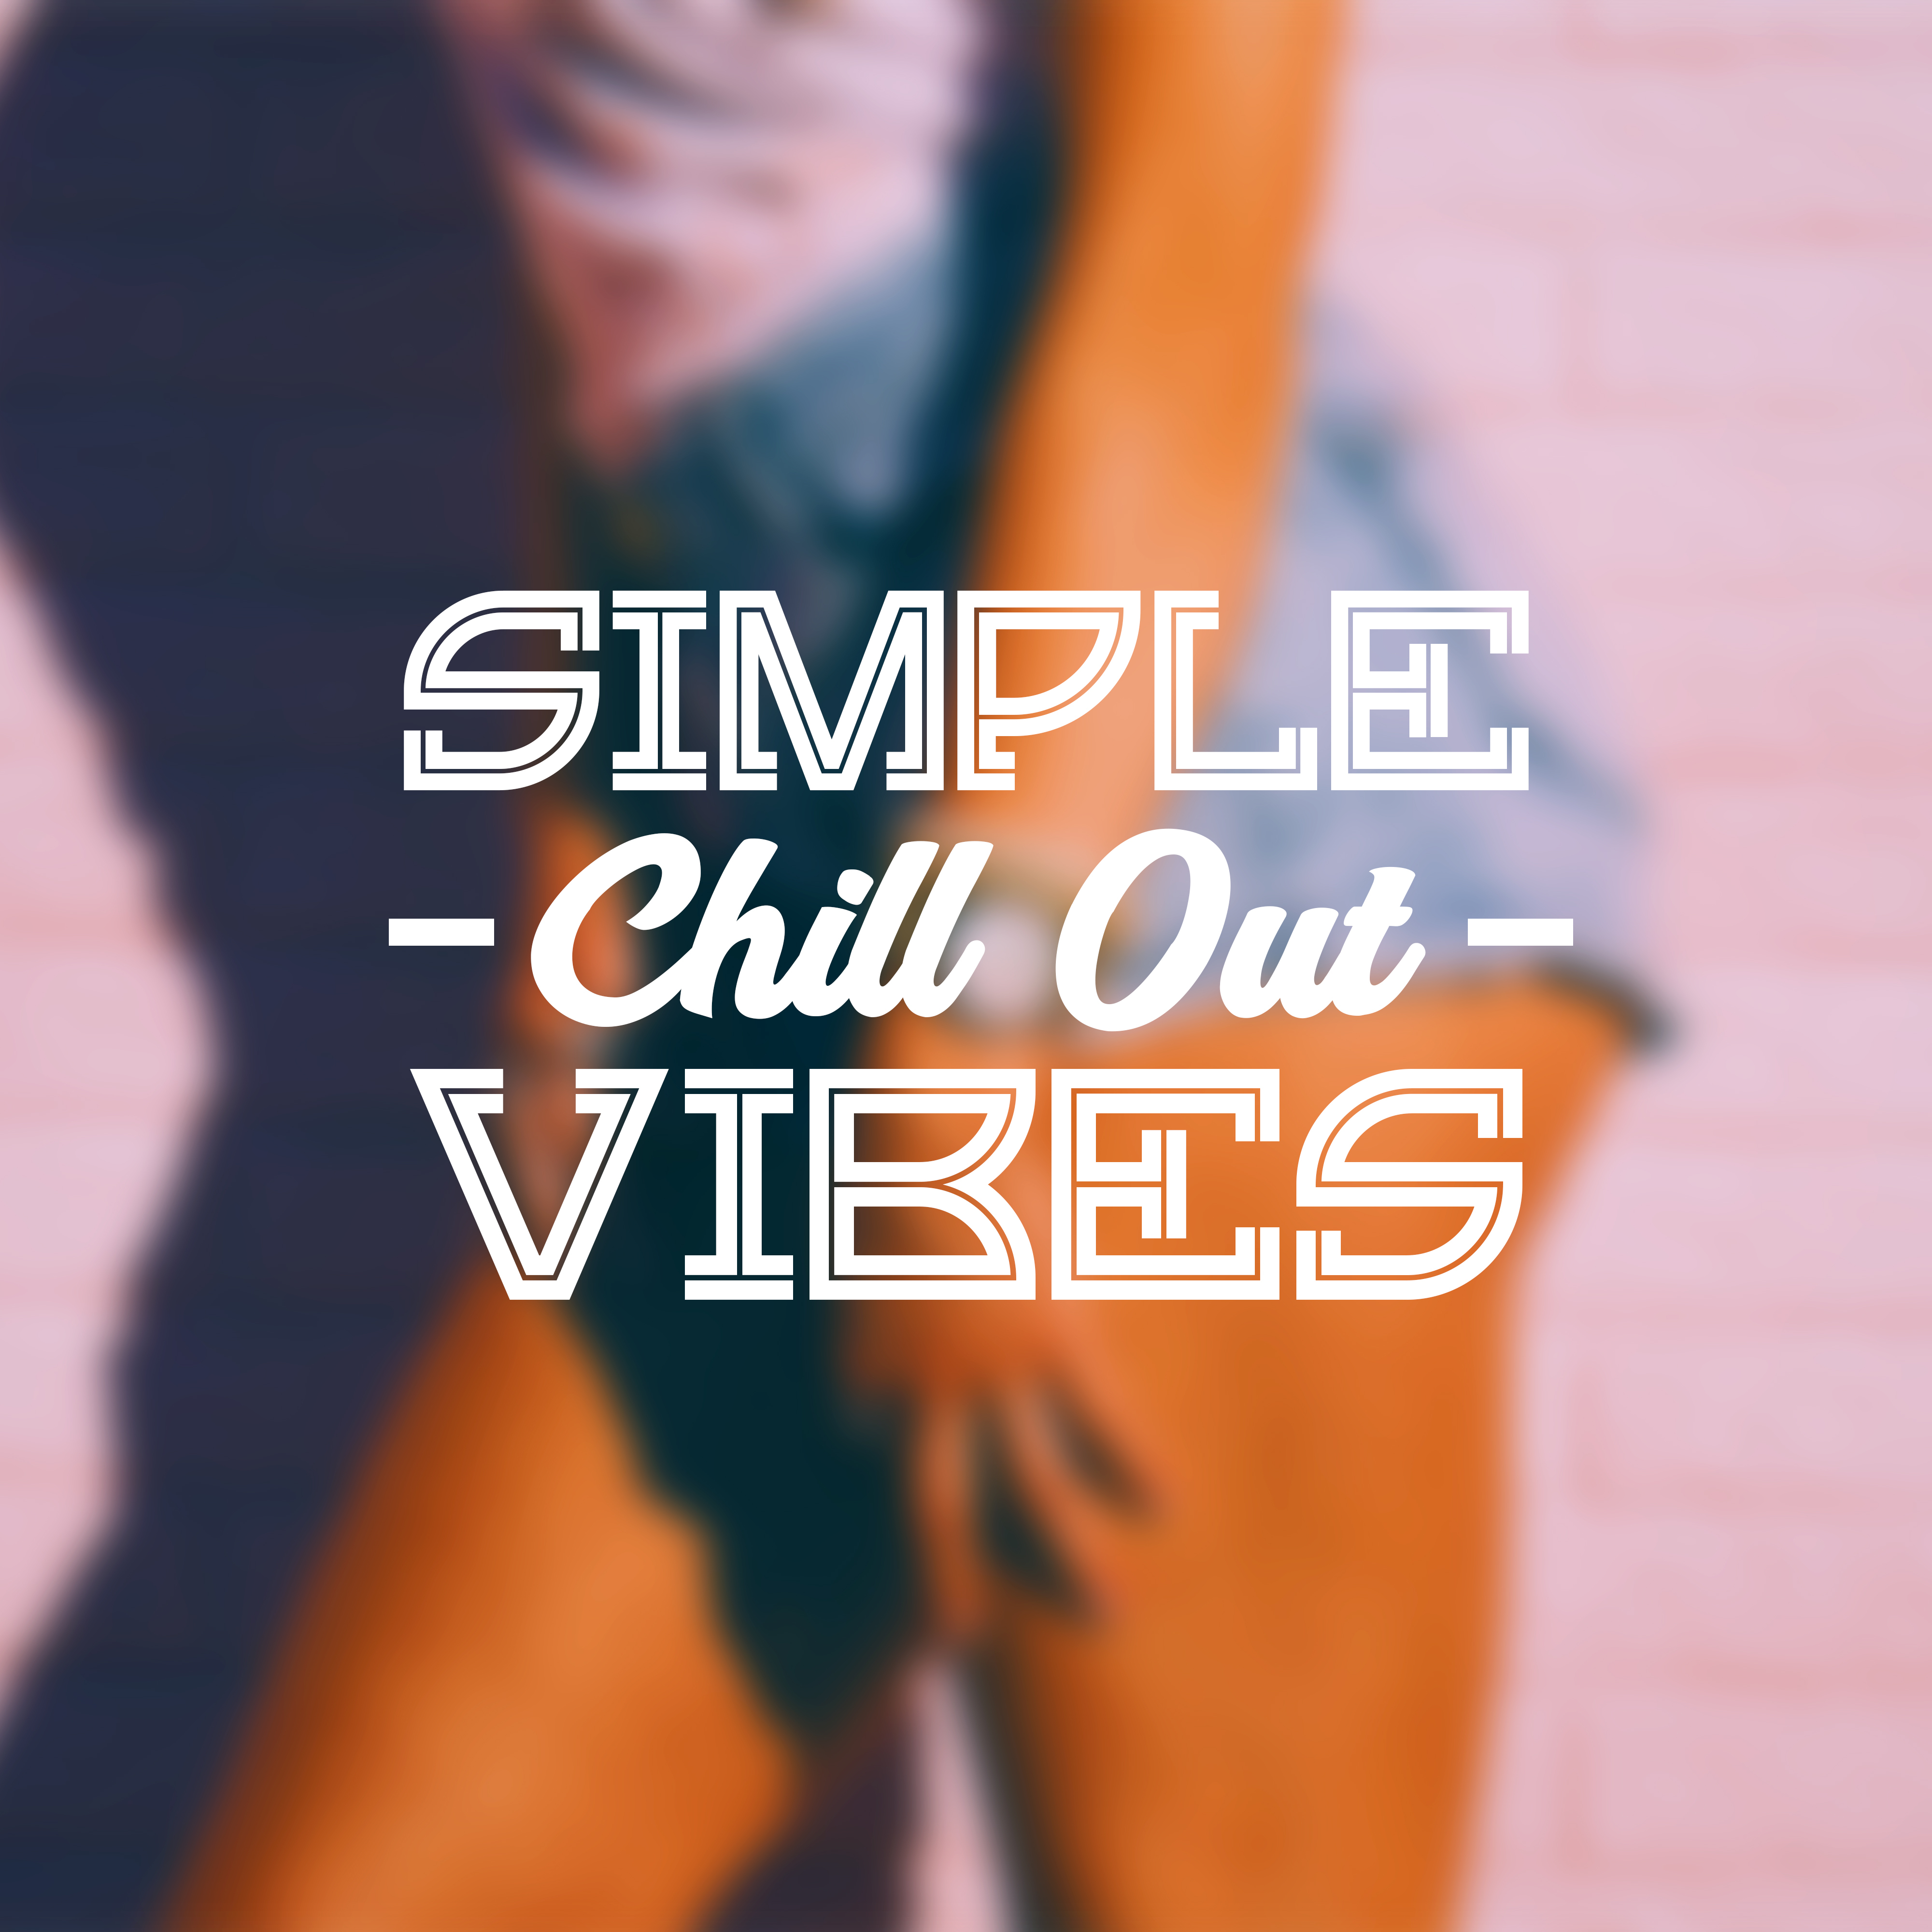 Simple Chill Out Vibes  Chill Out 2017, Future Hits, Electronic Music, Relax  Chill